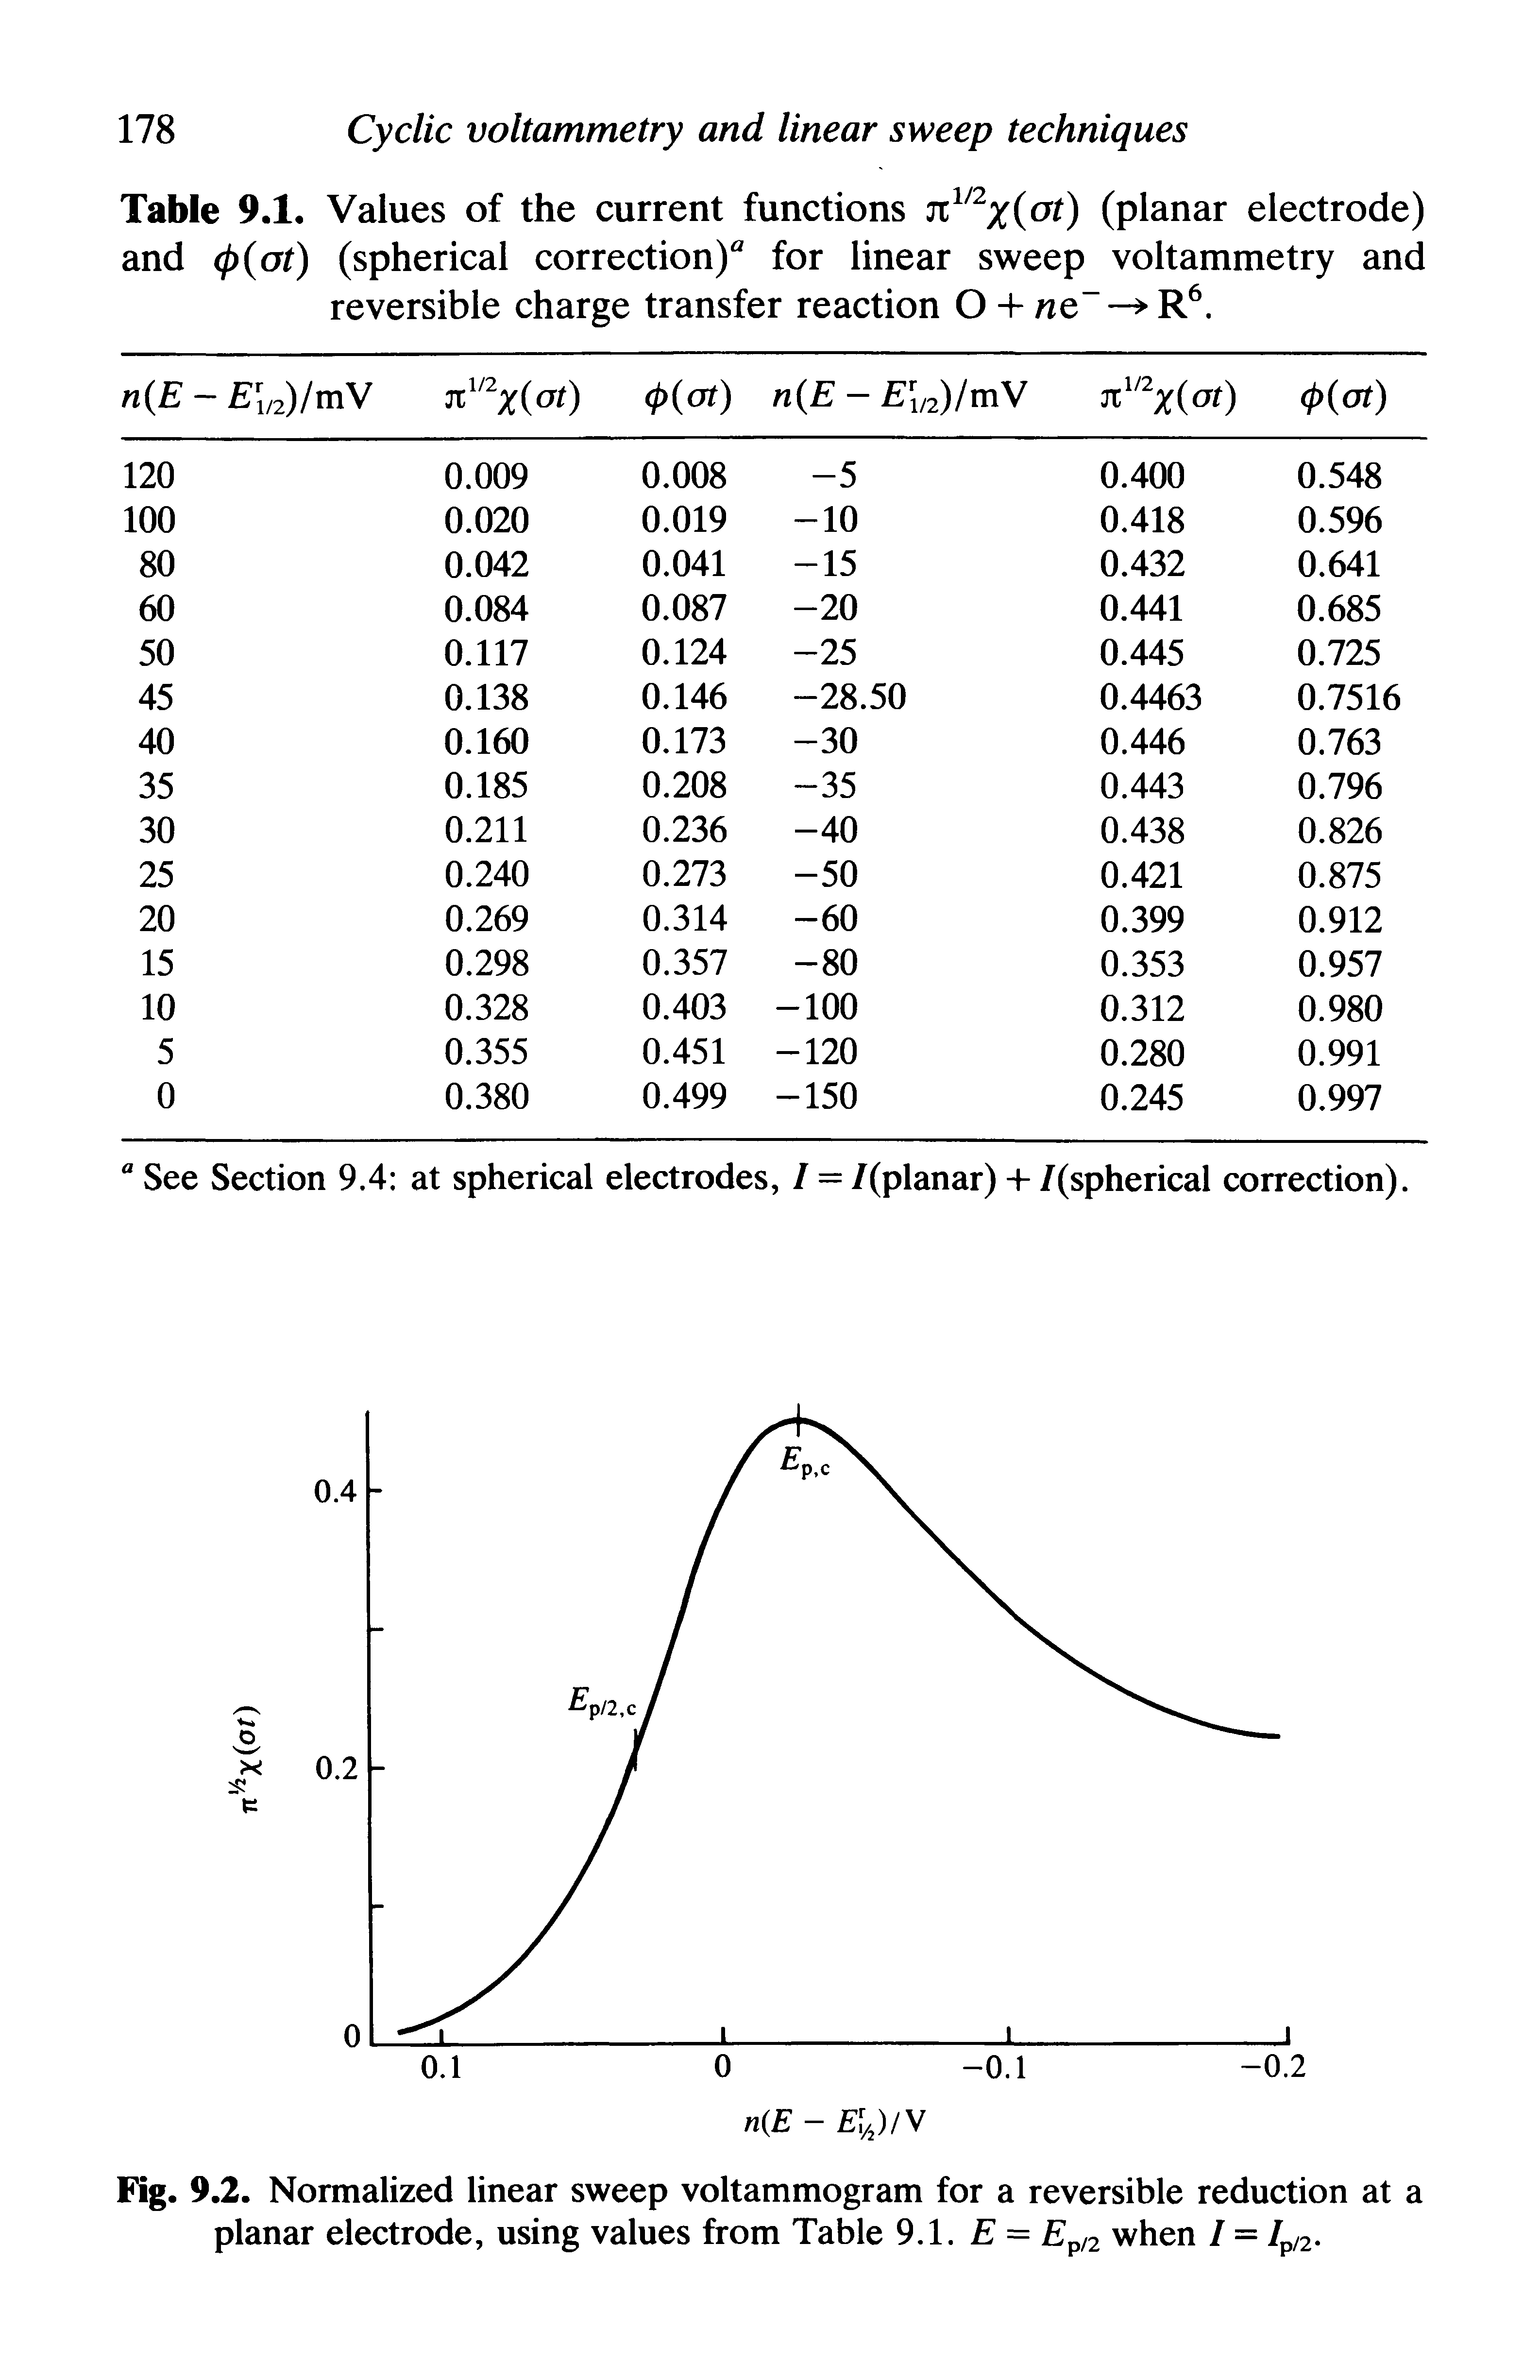 Fig. 9.2. Normalized linear sweep voltammogram for a reversible reduction at a planar electrode, using values from Table 9.1. E = Epl2 when / = /p/2.